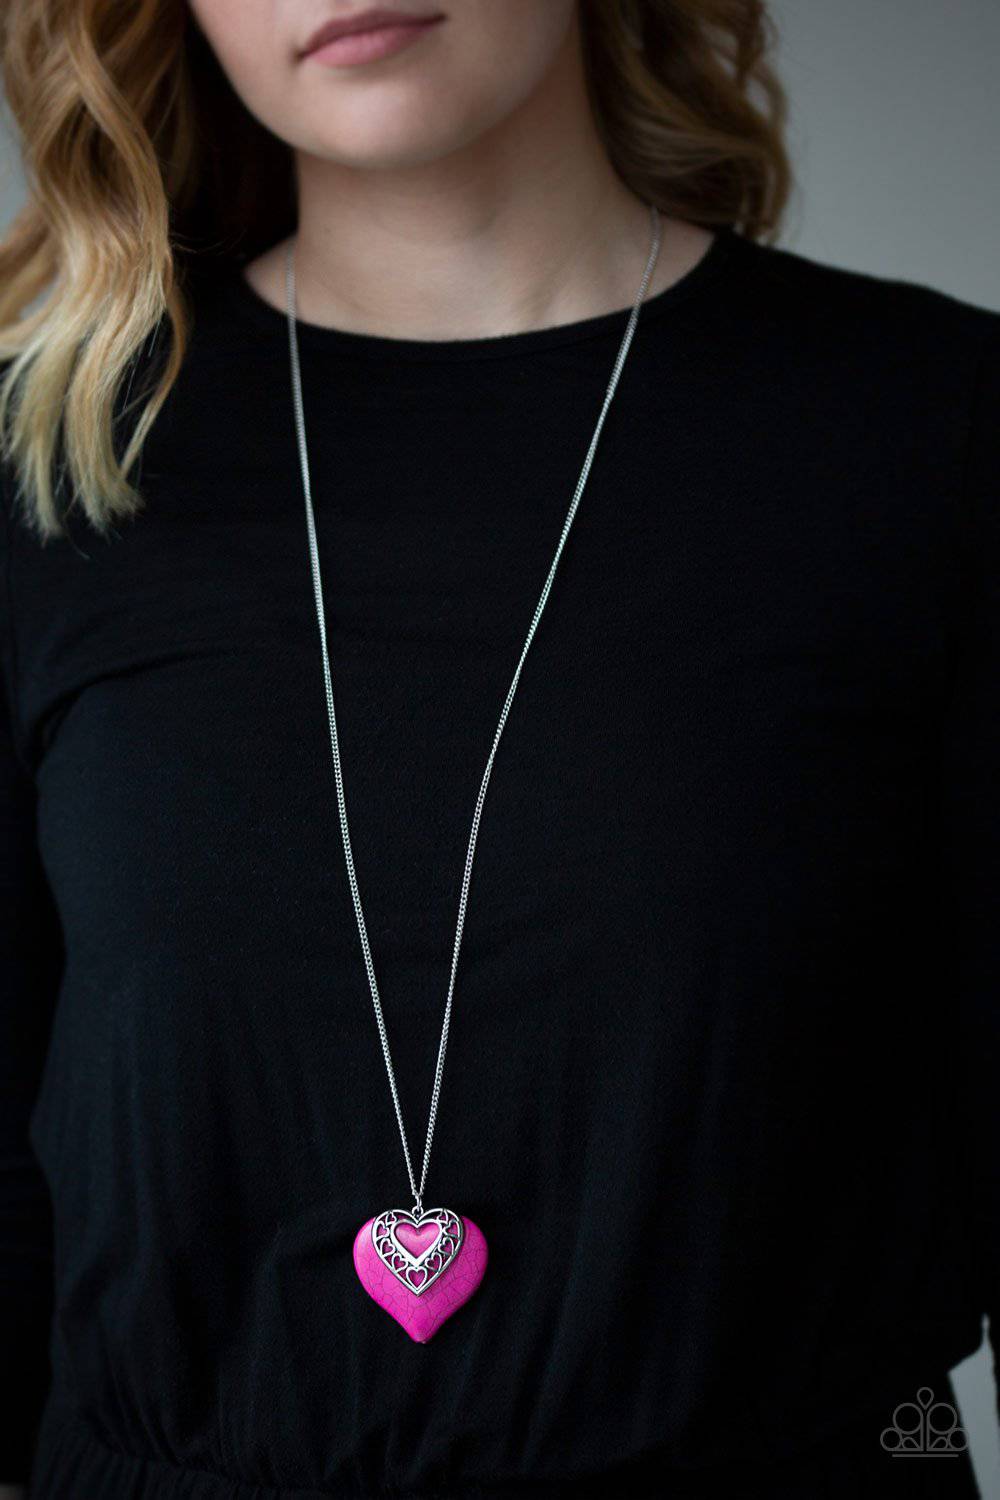 Southern Heart - Pink Heart Necklace - Paparazzi Accessories - GlaMarous Titi Jewels